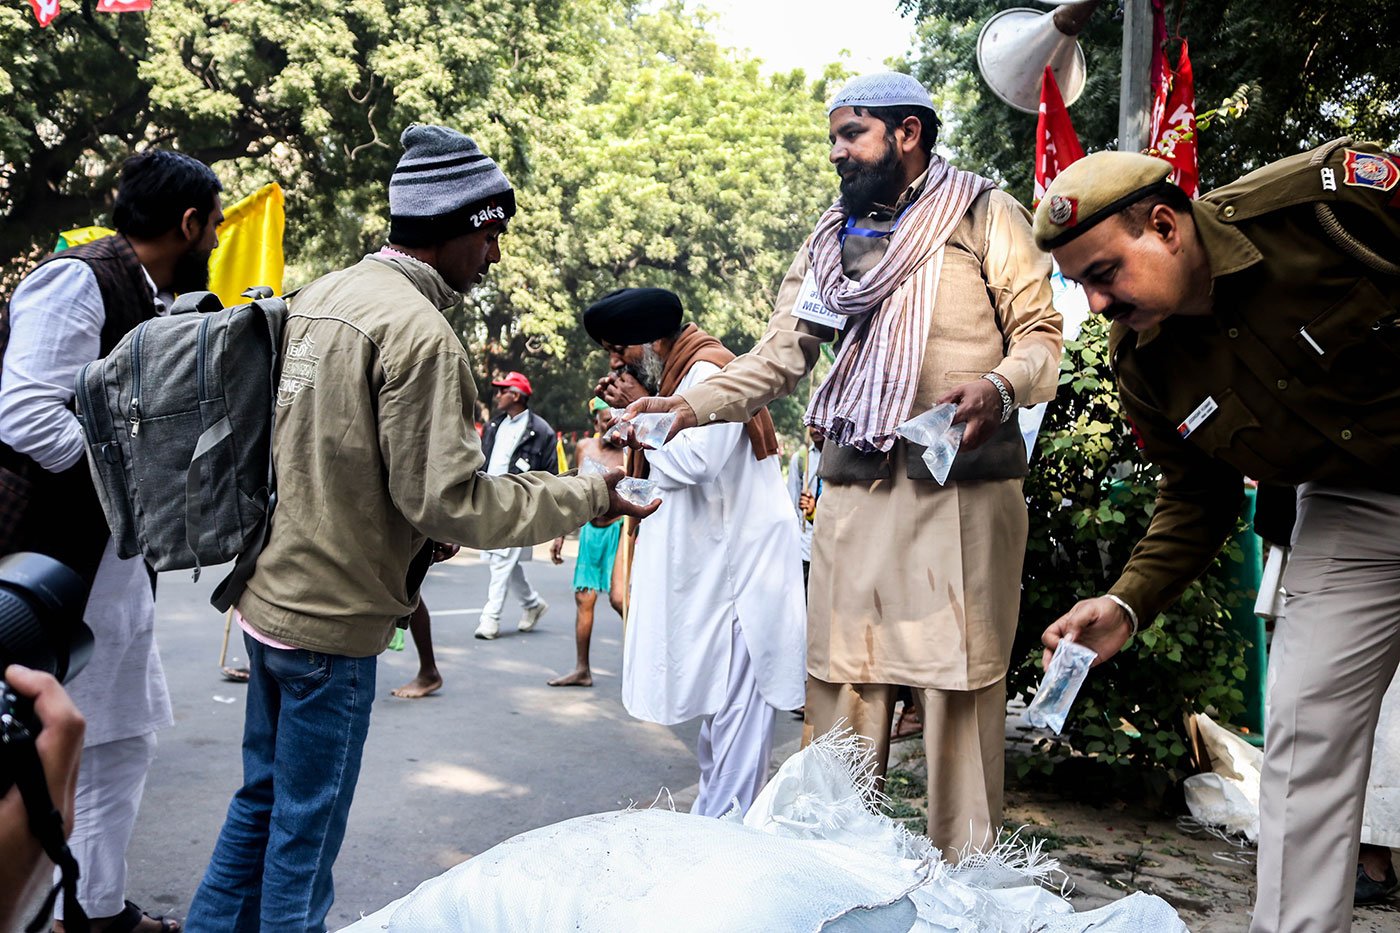 Volunteers distributing water to the farmers at Parliament Street